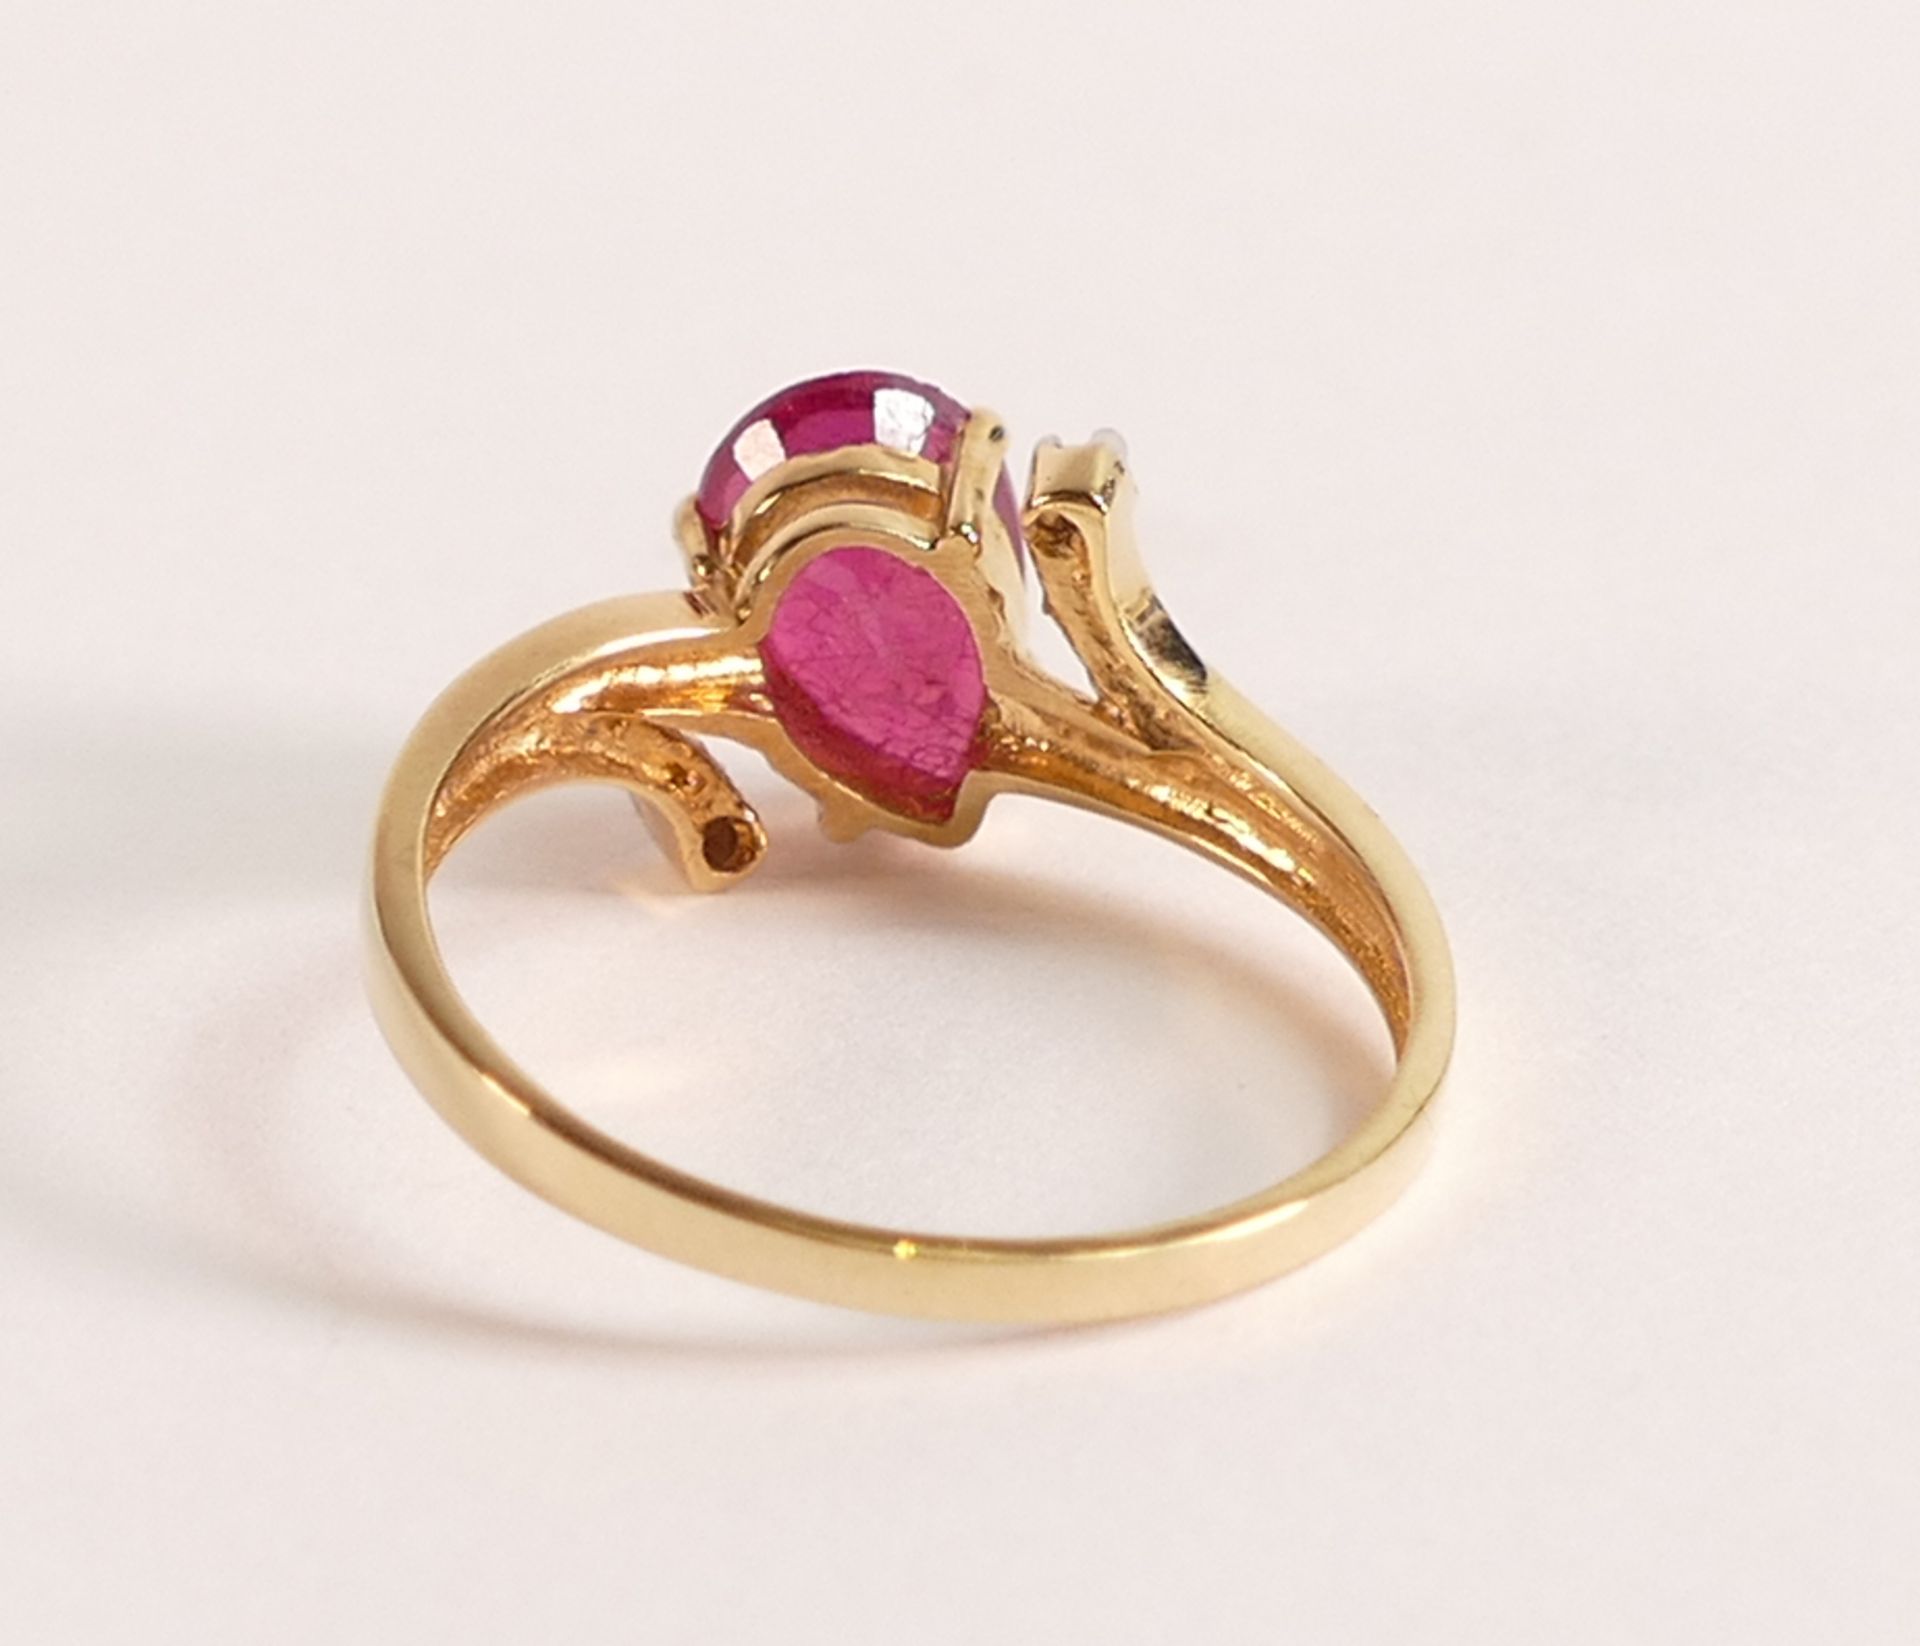 18ct Gold Ring with Ruby and Diamond - Ring size N 1/2, weight 2.5 grams. Pear shaped Ruby measure - Image 3 of 3